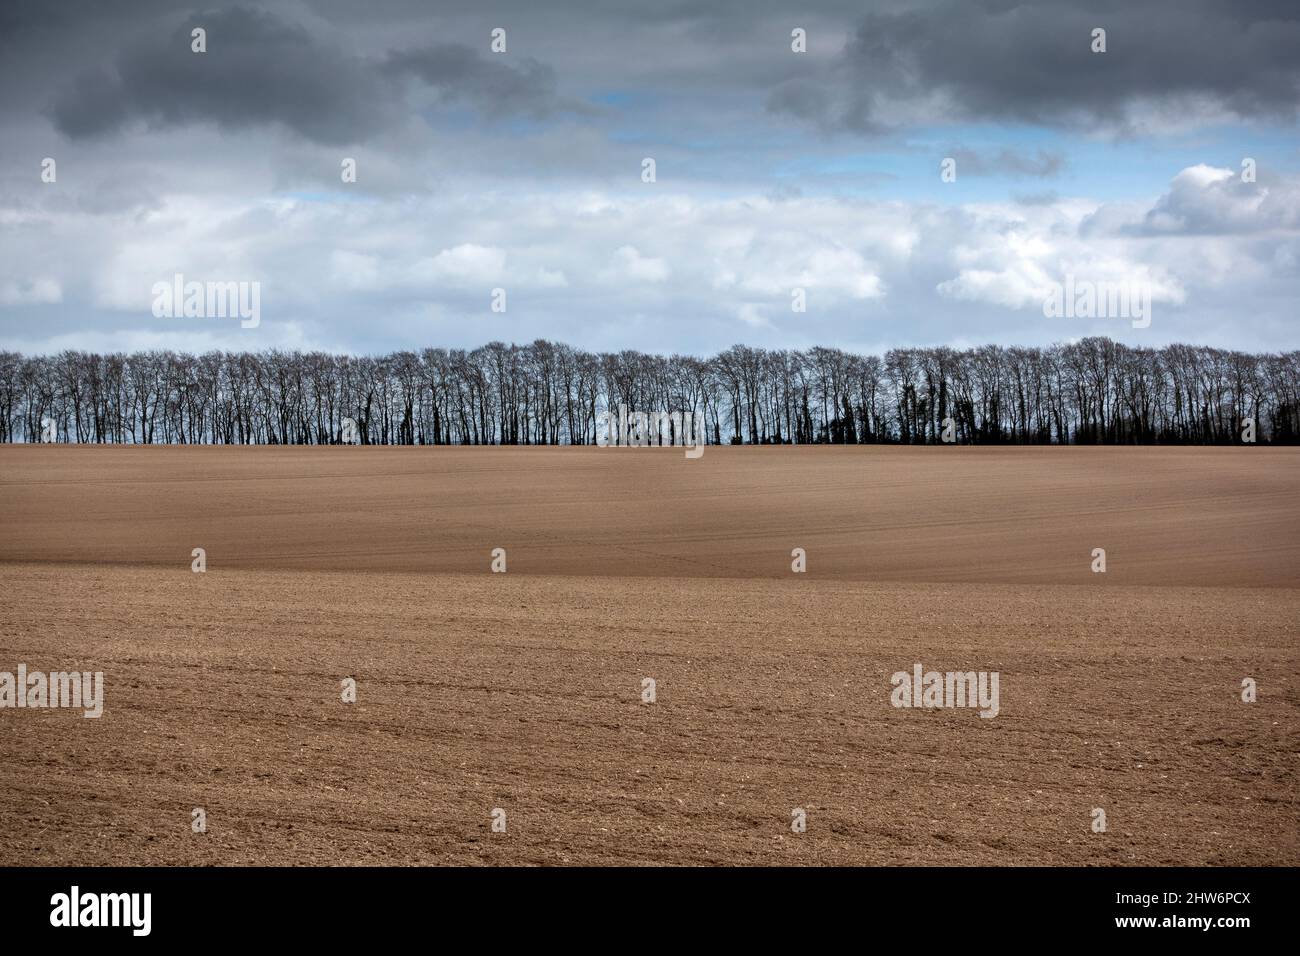 Winter landscape - Silhouette of bare trees across the edge of a ploughed field covered by dark clouds Stock Photo